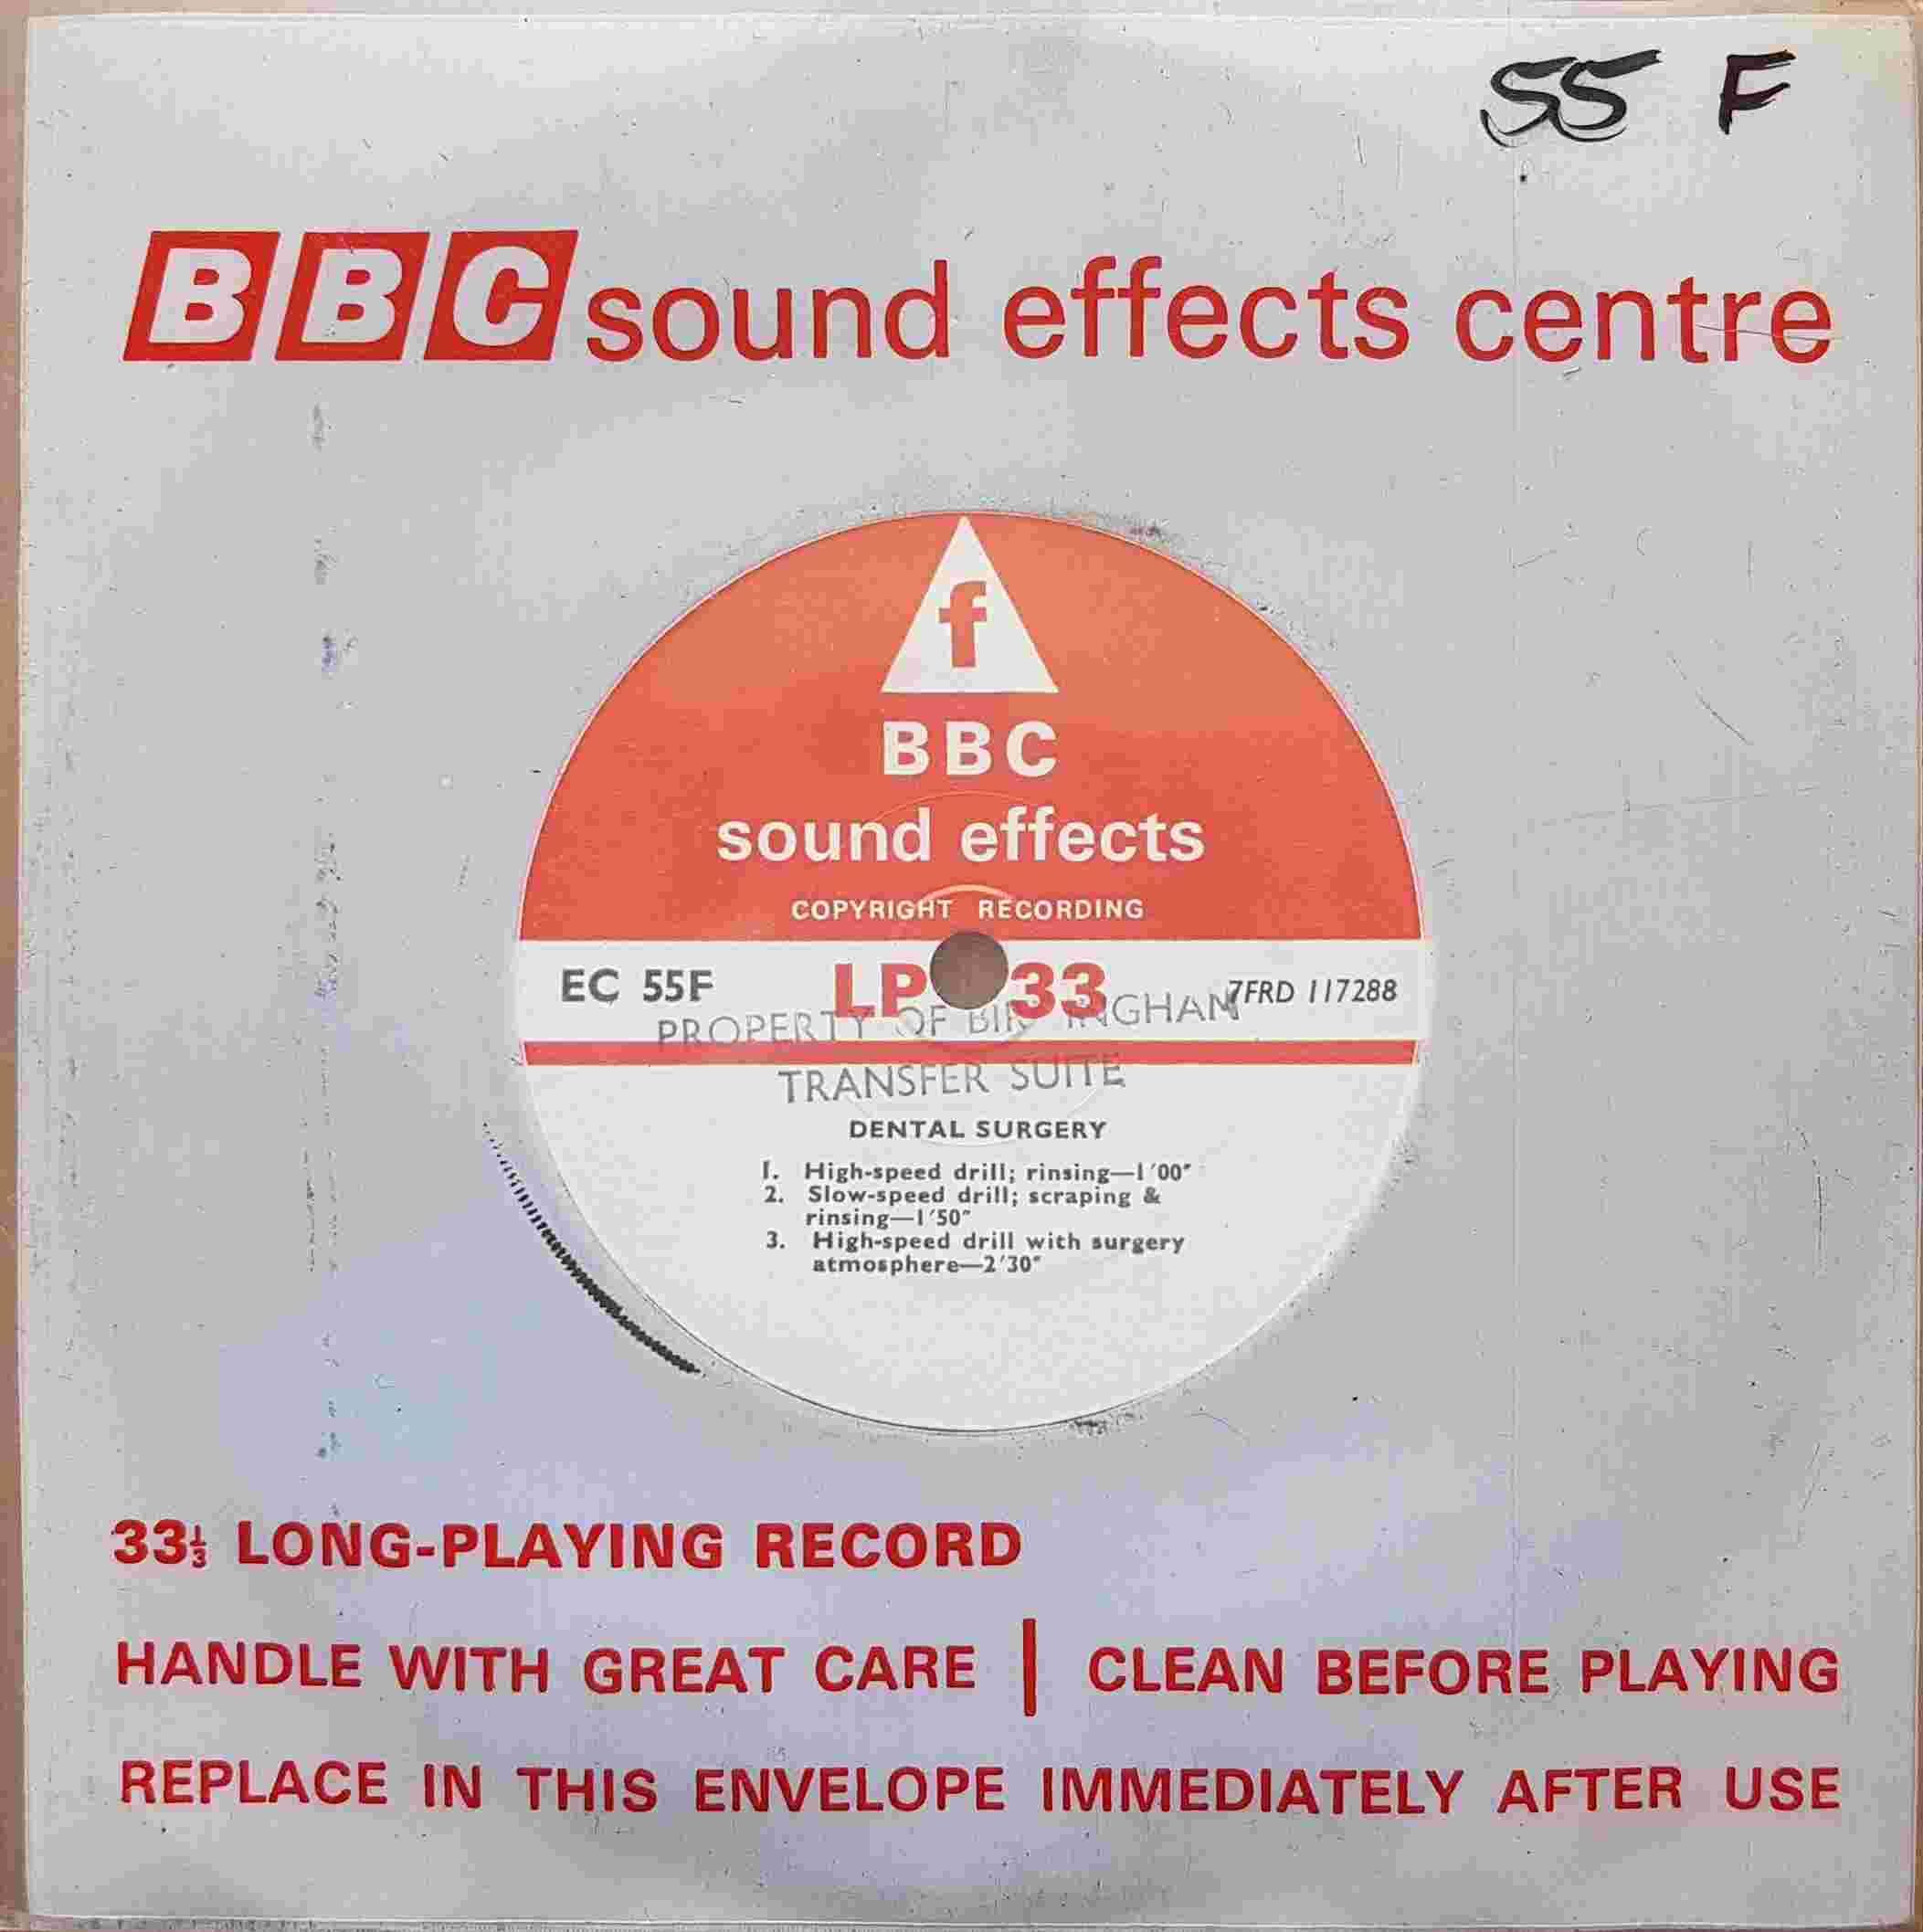 Picture of EC 55F Dental surgery by artist Not registered from the BBC records and Tapes library